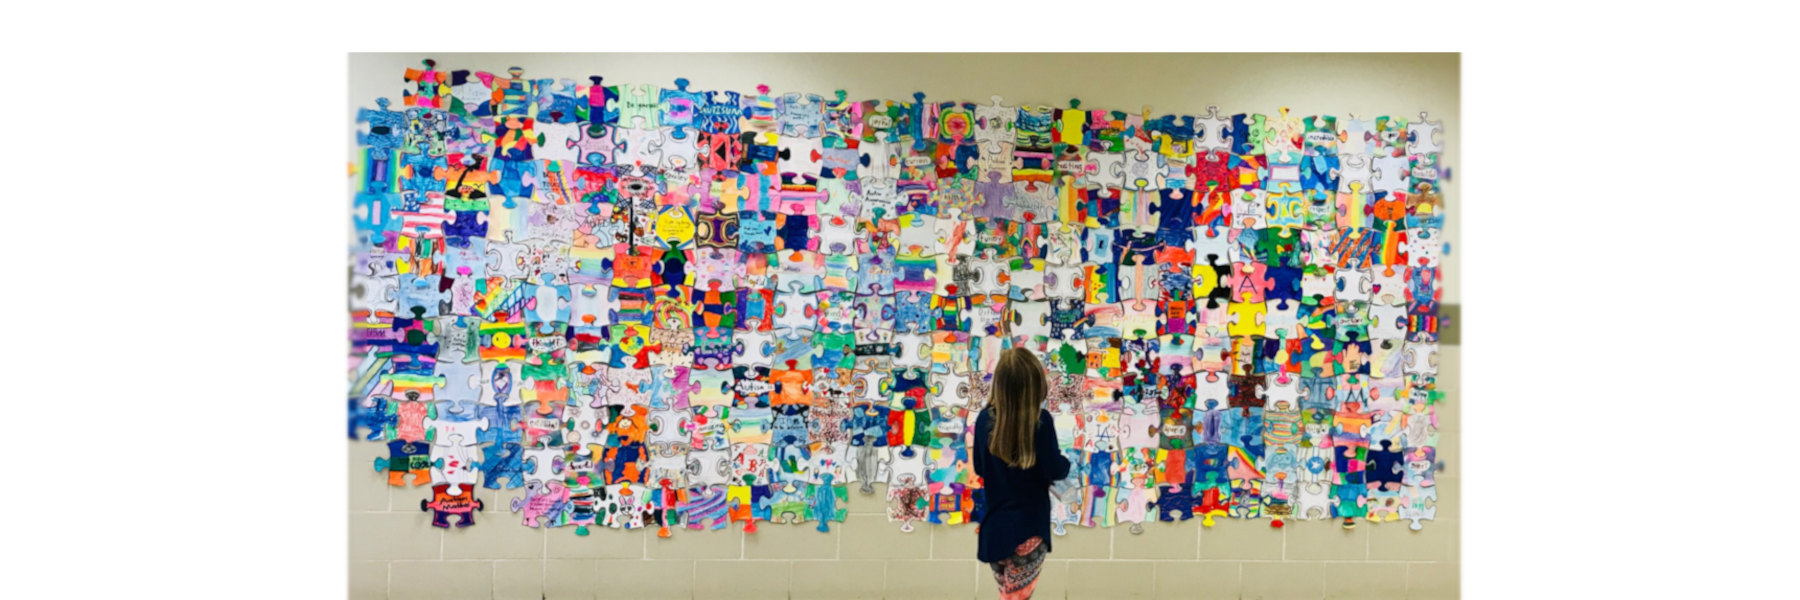 autism wall 2019